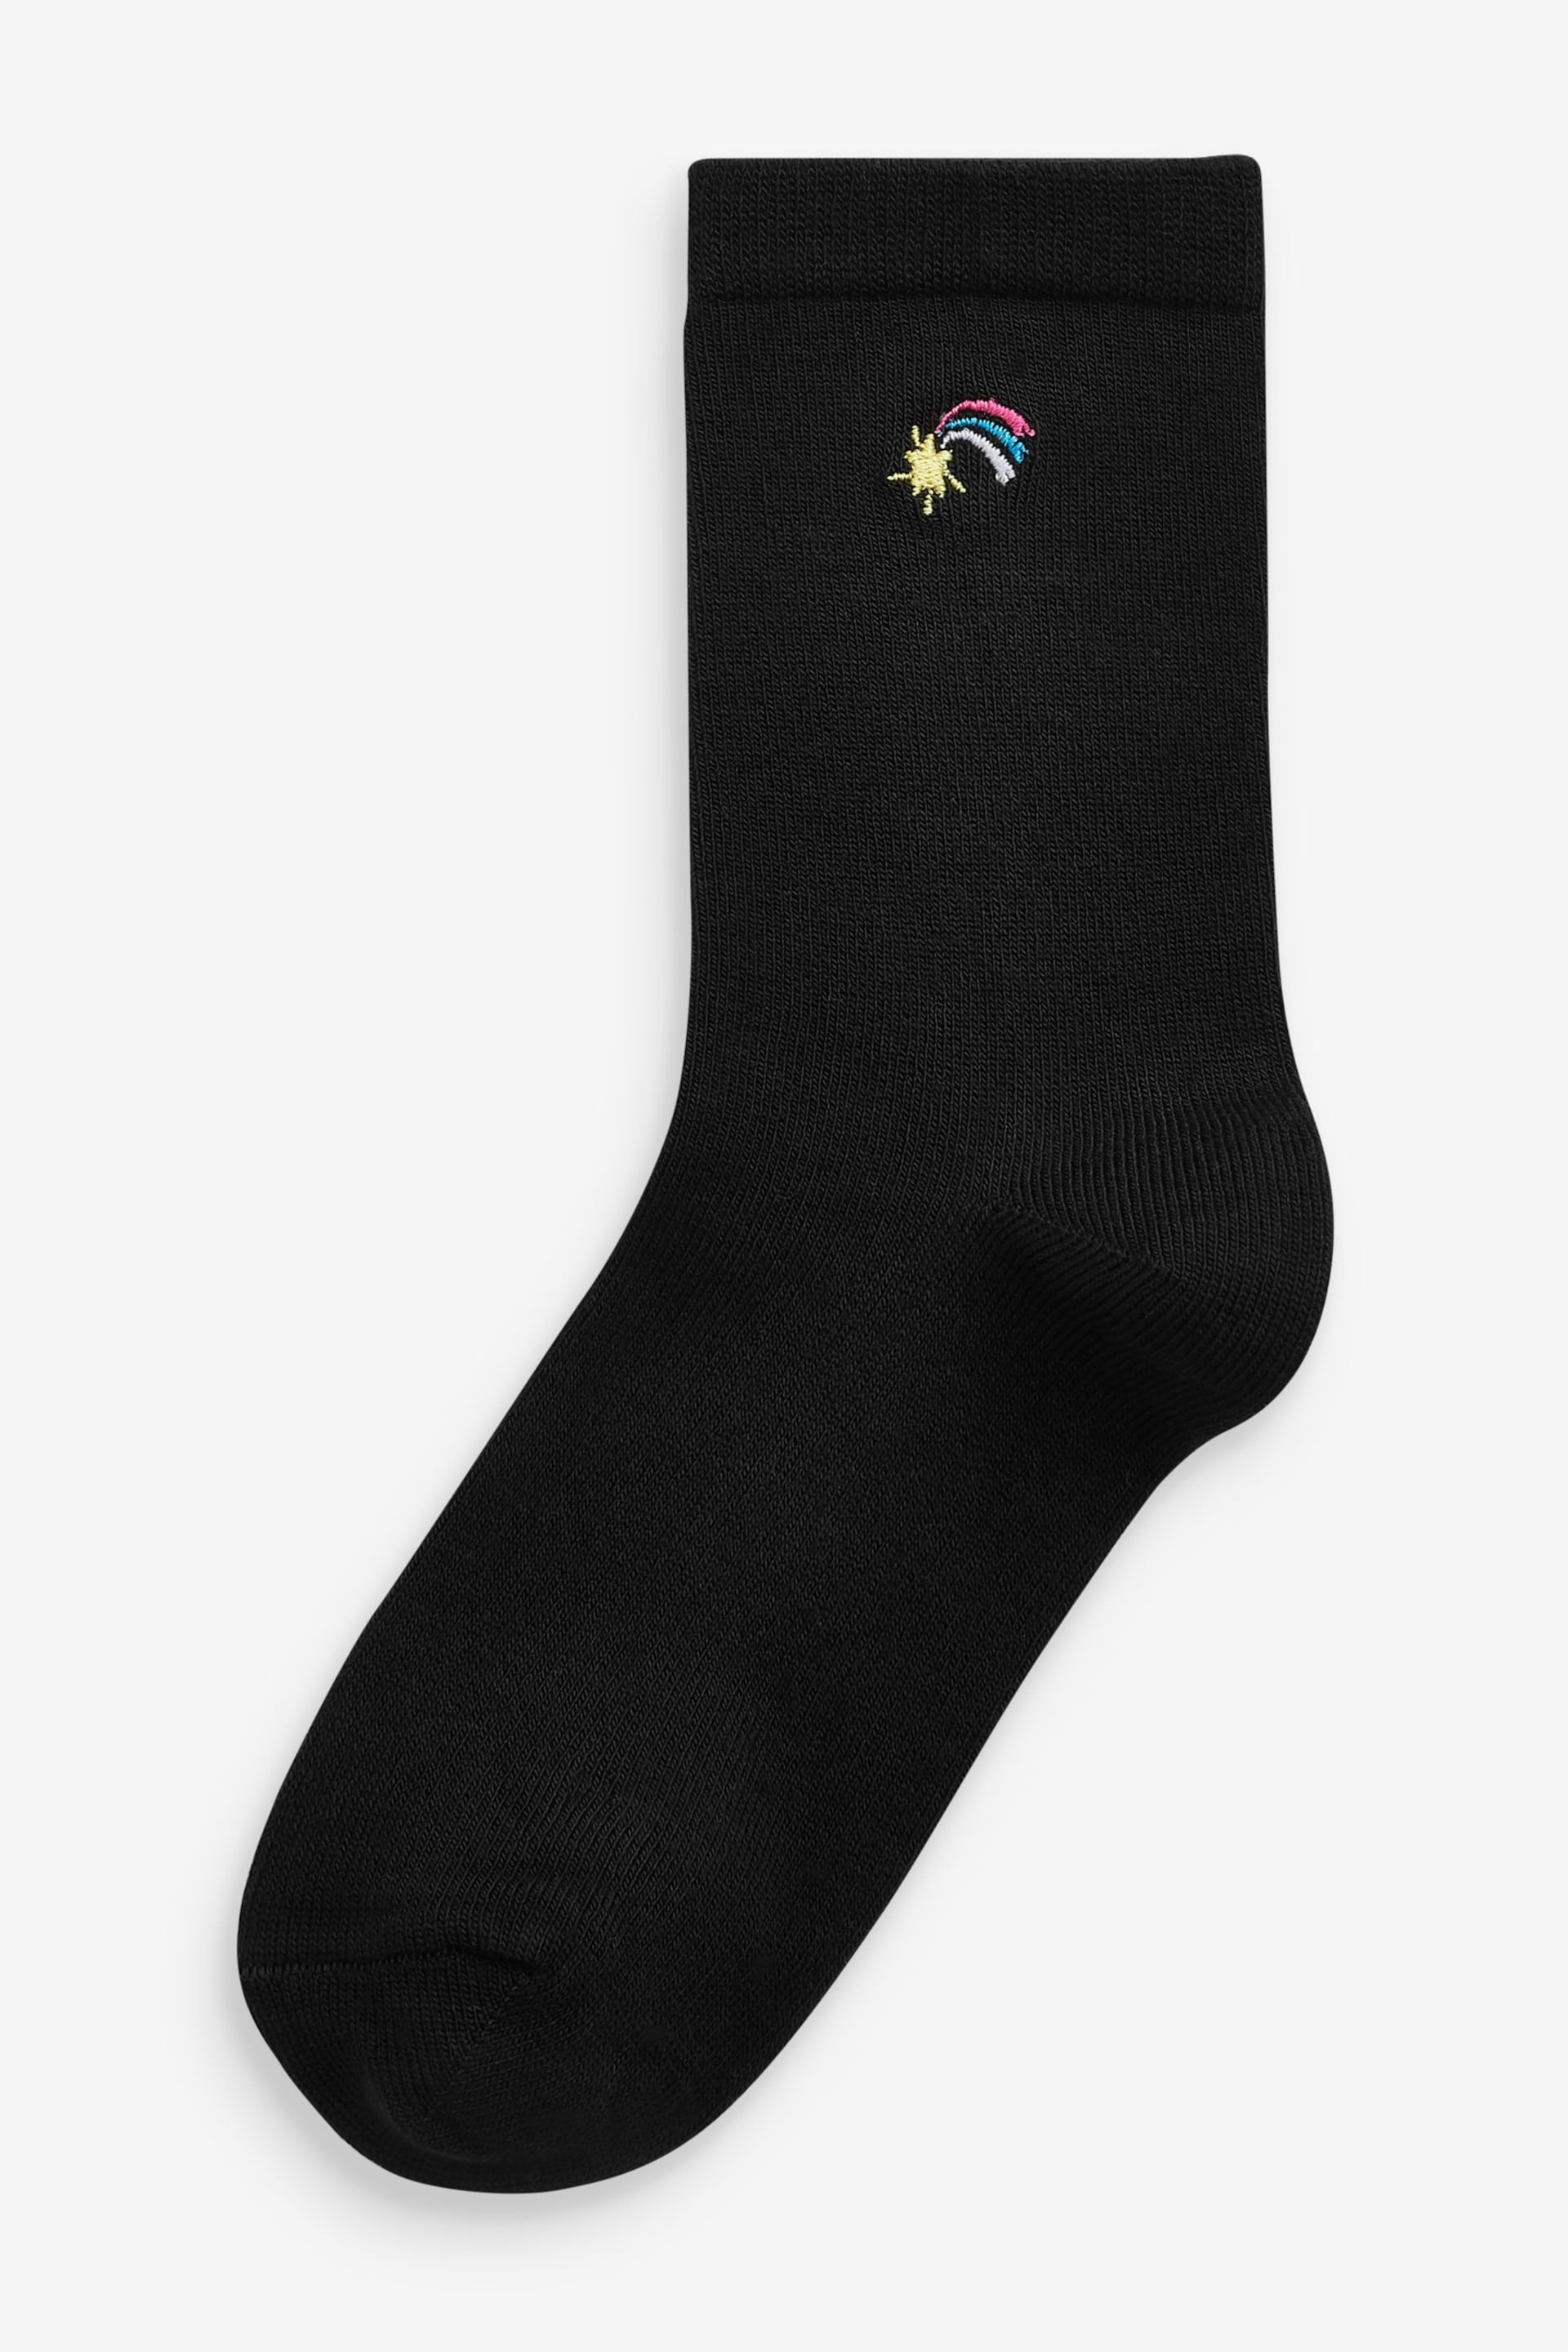 Black 5 Pack Bamboo Rich Unicorn Embroidered Ankle Socks - Image 6 of 6